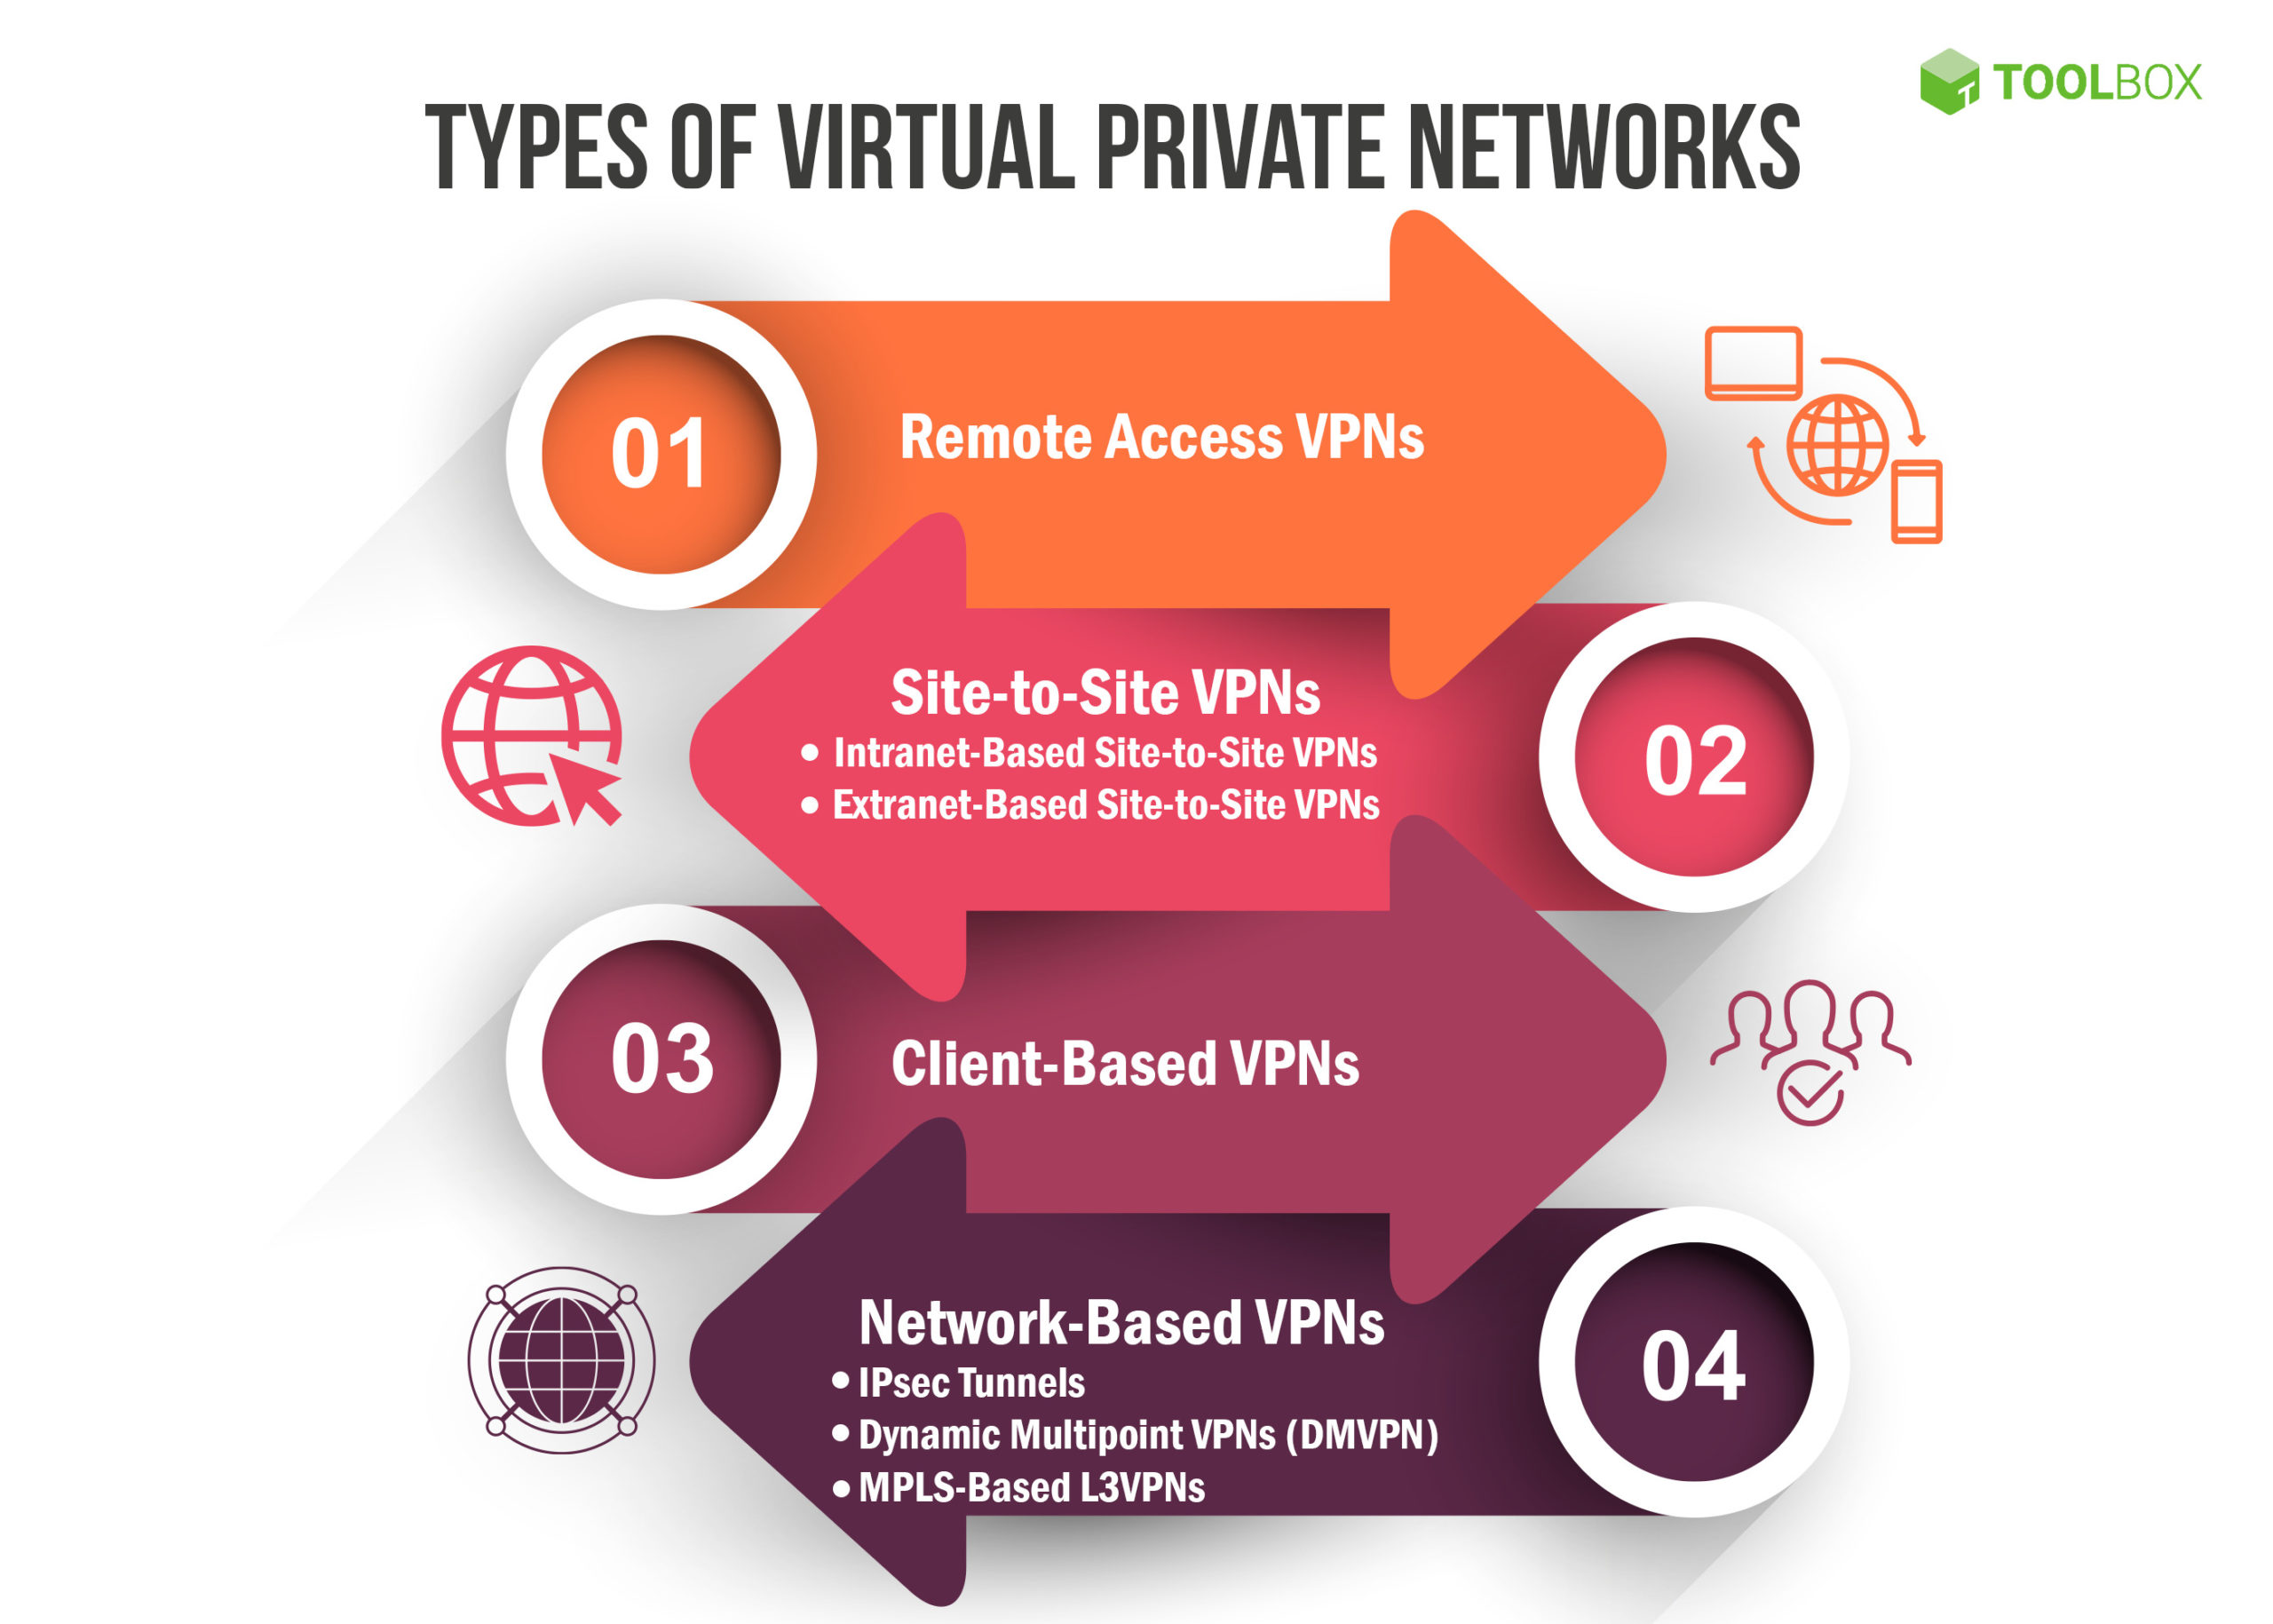 Use a VPN: Consider using a virtual private network (VPN) when using public Wi-Fi networks to protect your device.
Enable two-factor authentication: Use two-factor authentication on your accounts to add an extra layer of security.